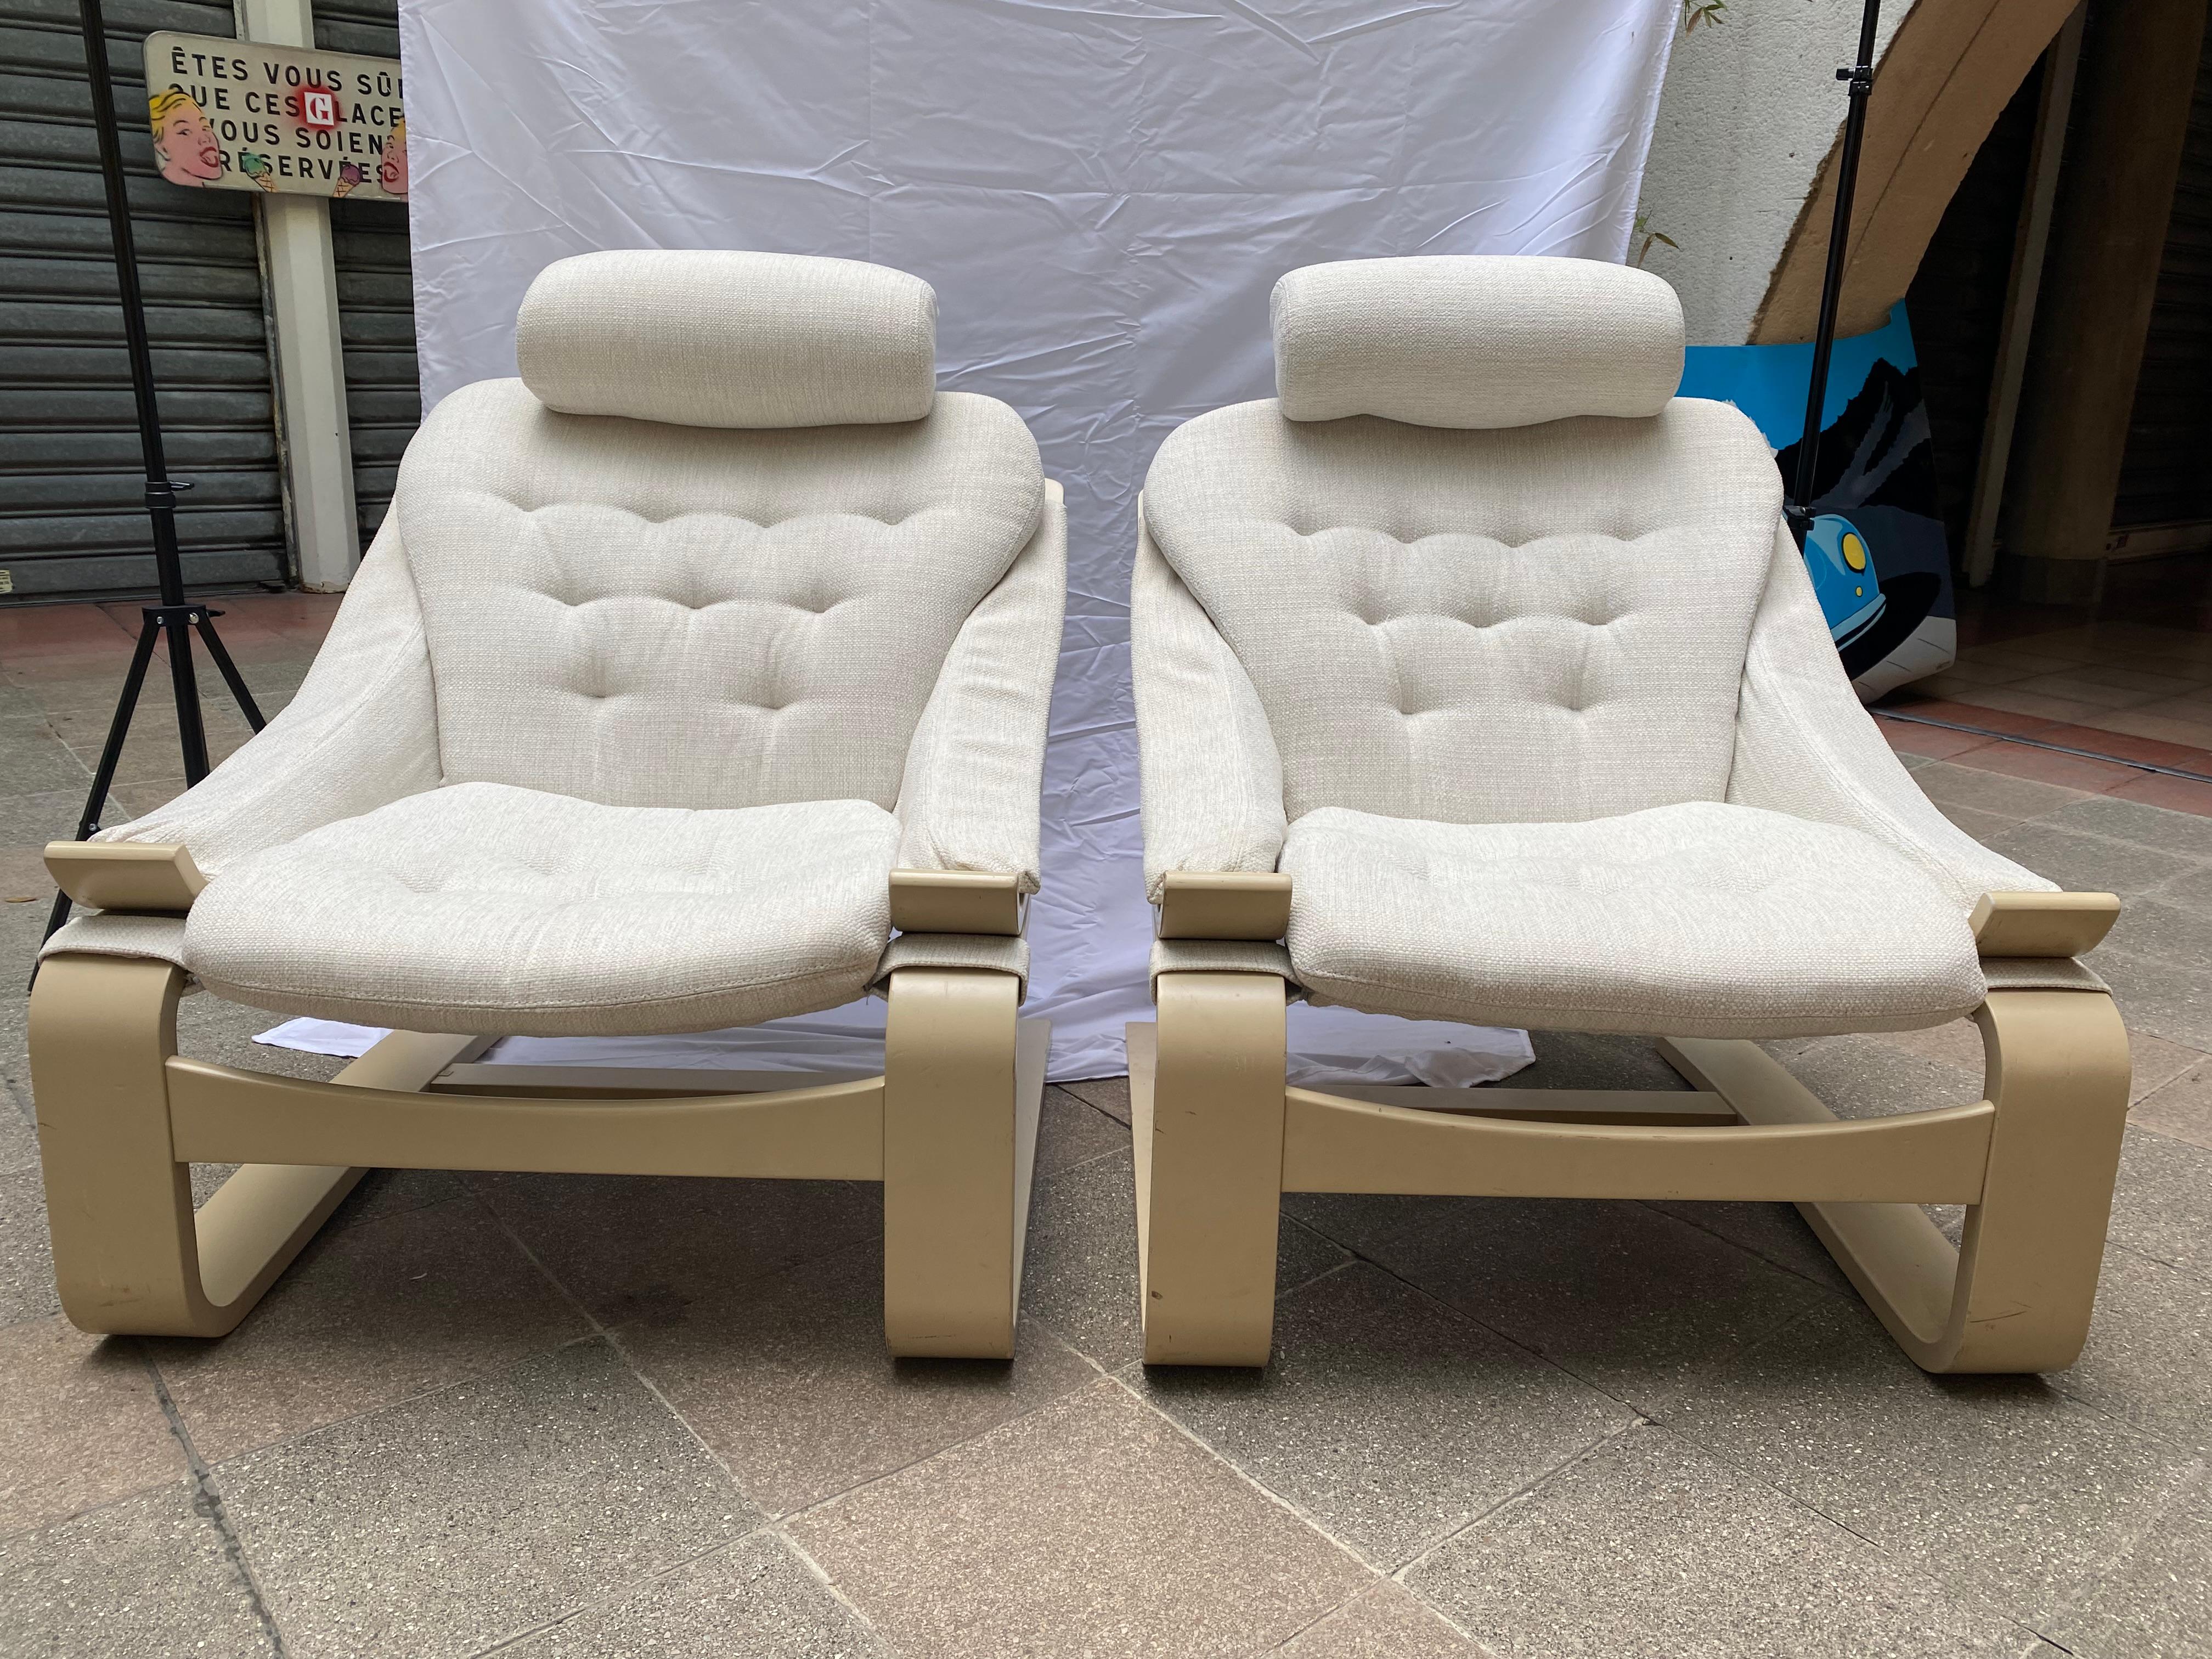 Pair of Kroken armchairs - Ake FRIBYTER
Scandinavian design 
Circa 1970
Materials: creamy white fabric and beech wood structure 
Dimensions: h 88 cm x w 75 cm x d86 cm
Ref : 40193/18
Price: 1900 € for the chair.